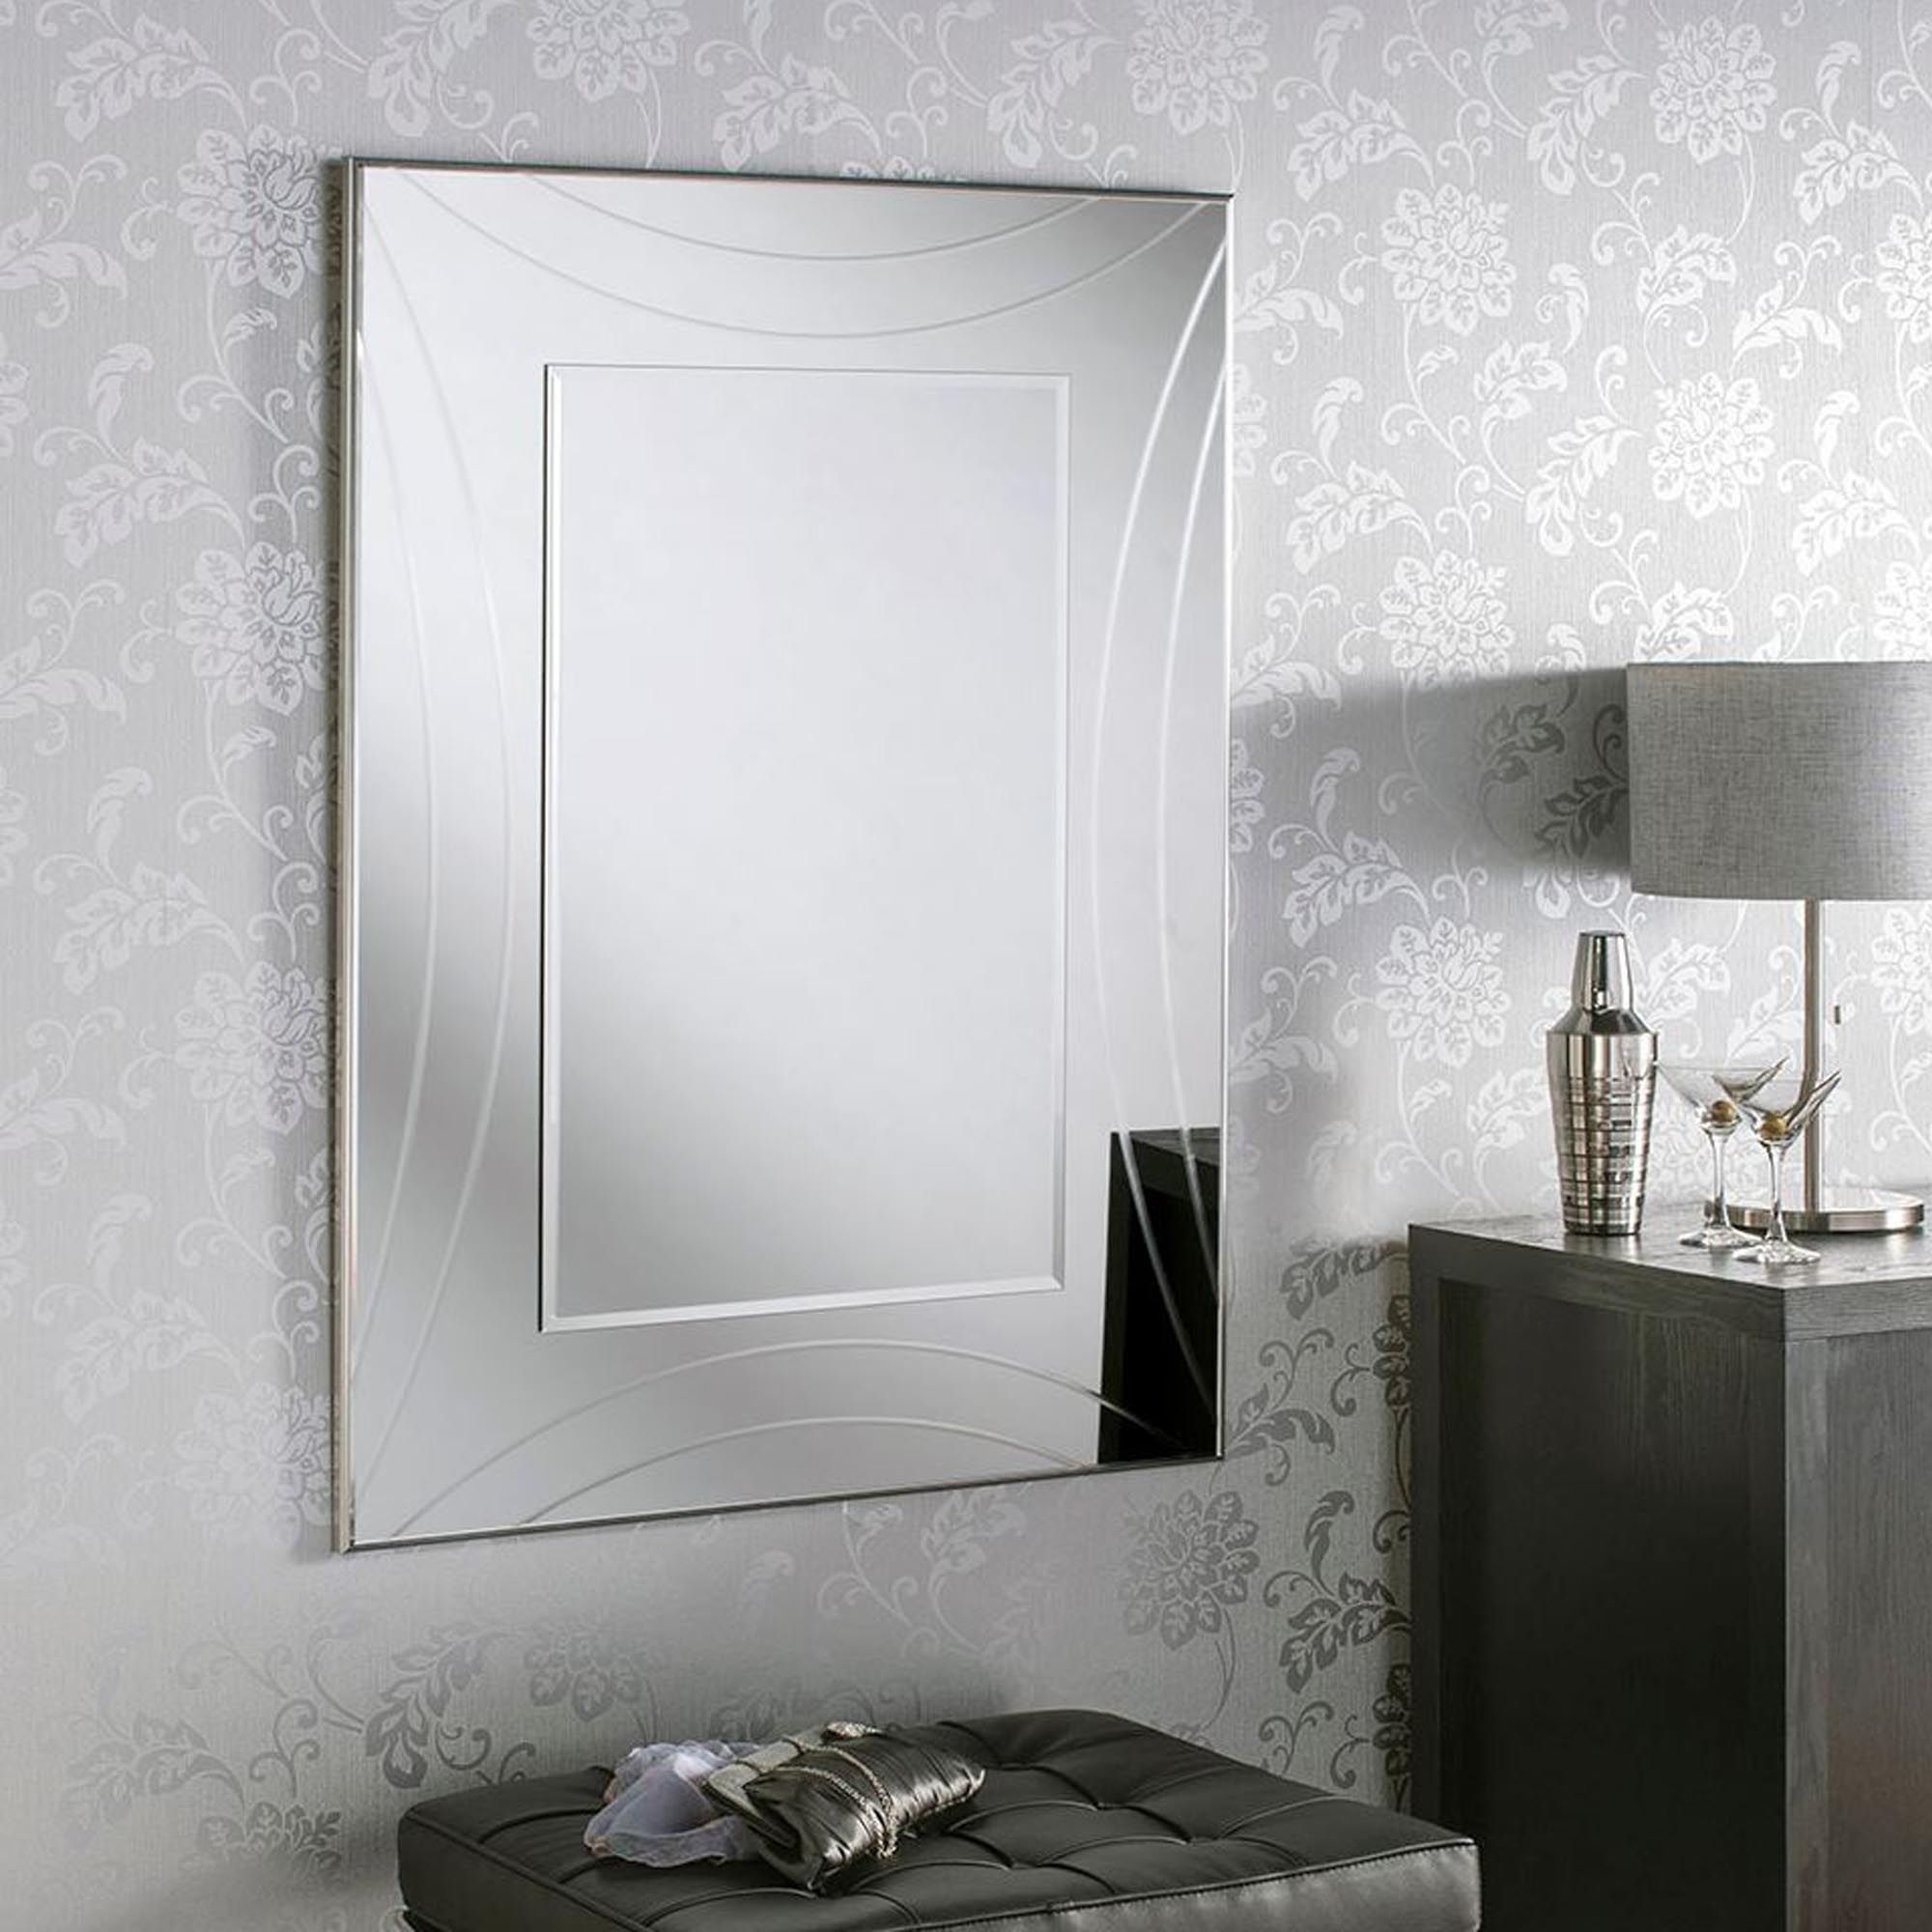 Contemporary Silver Rectangular Wall Mirror | Homesdirect365 Within Black Beaded Rectangular Wall Mirrors (View 12 of 15)